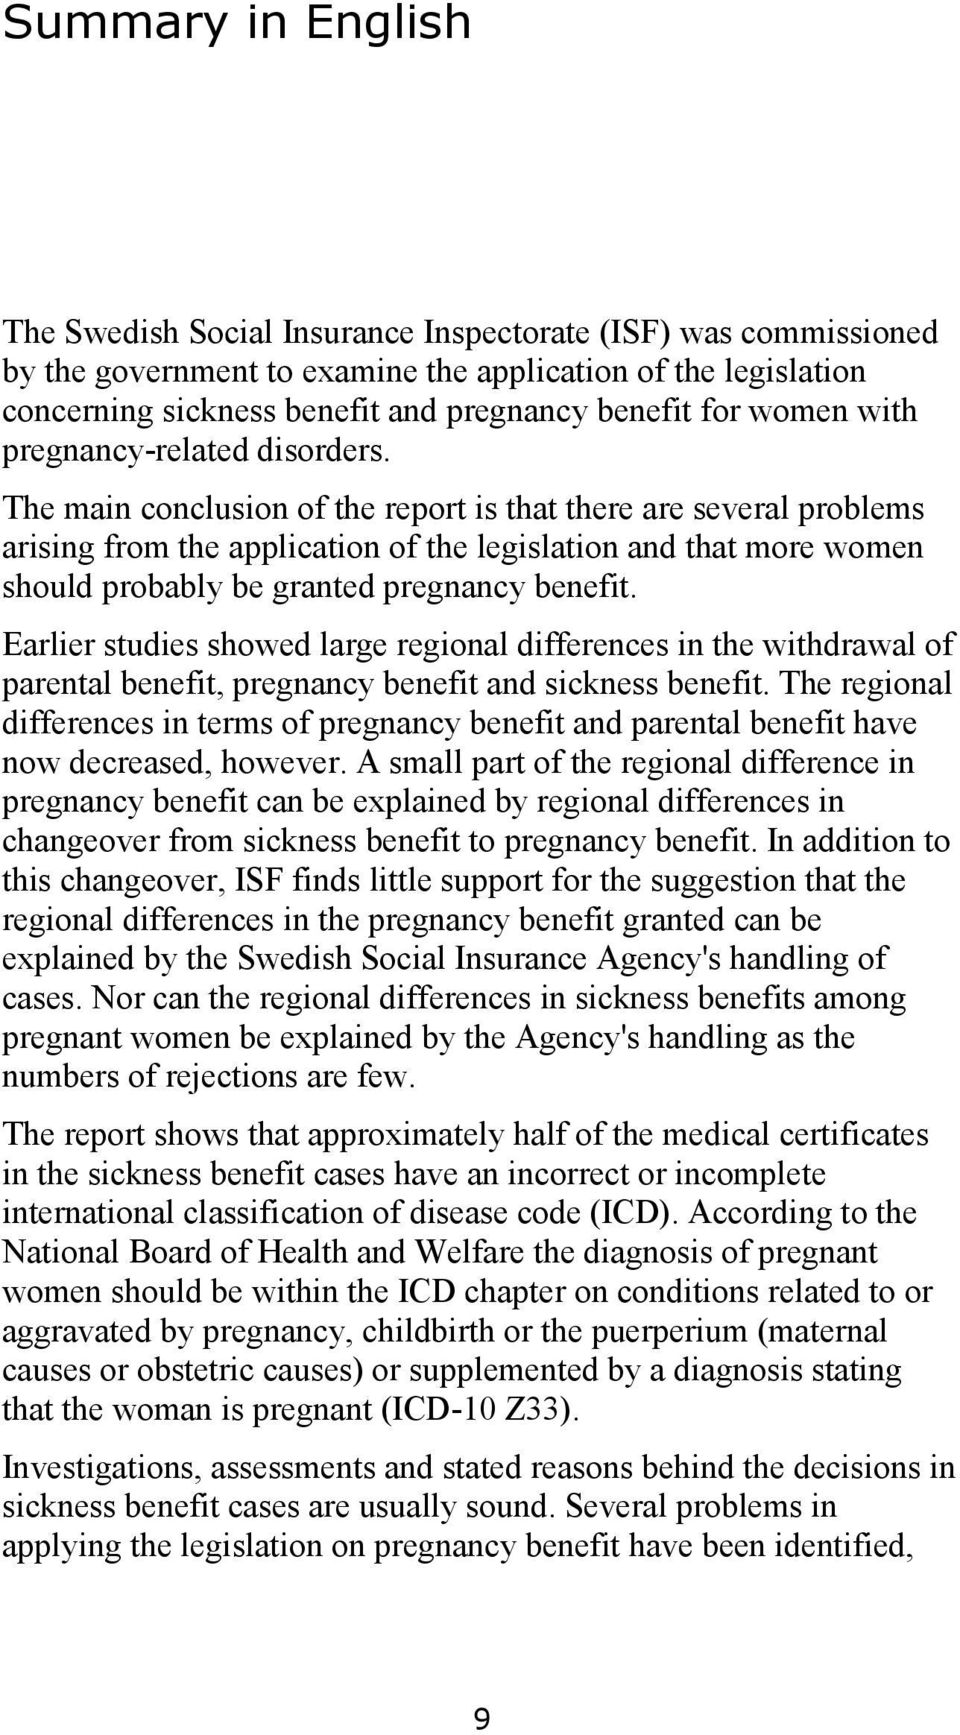 The main conclusion of the report is that there are several problems arising from the application of the legislation and that more women should probably be granted pregnancy benefit.